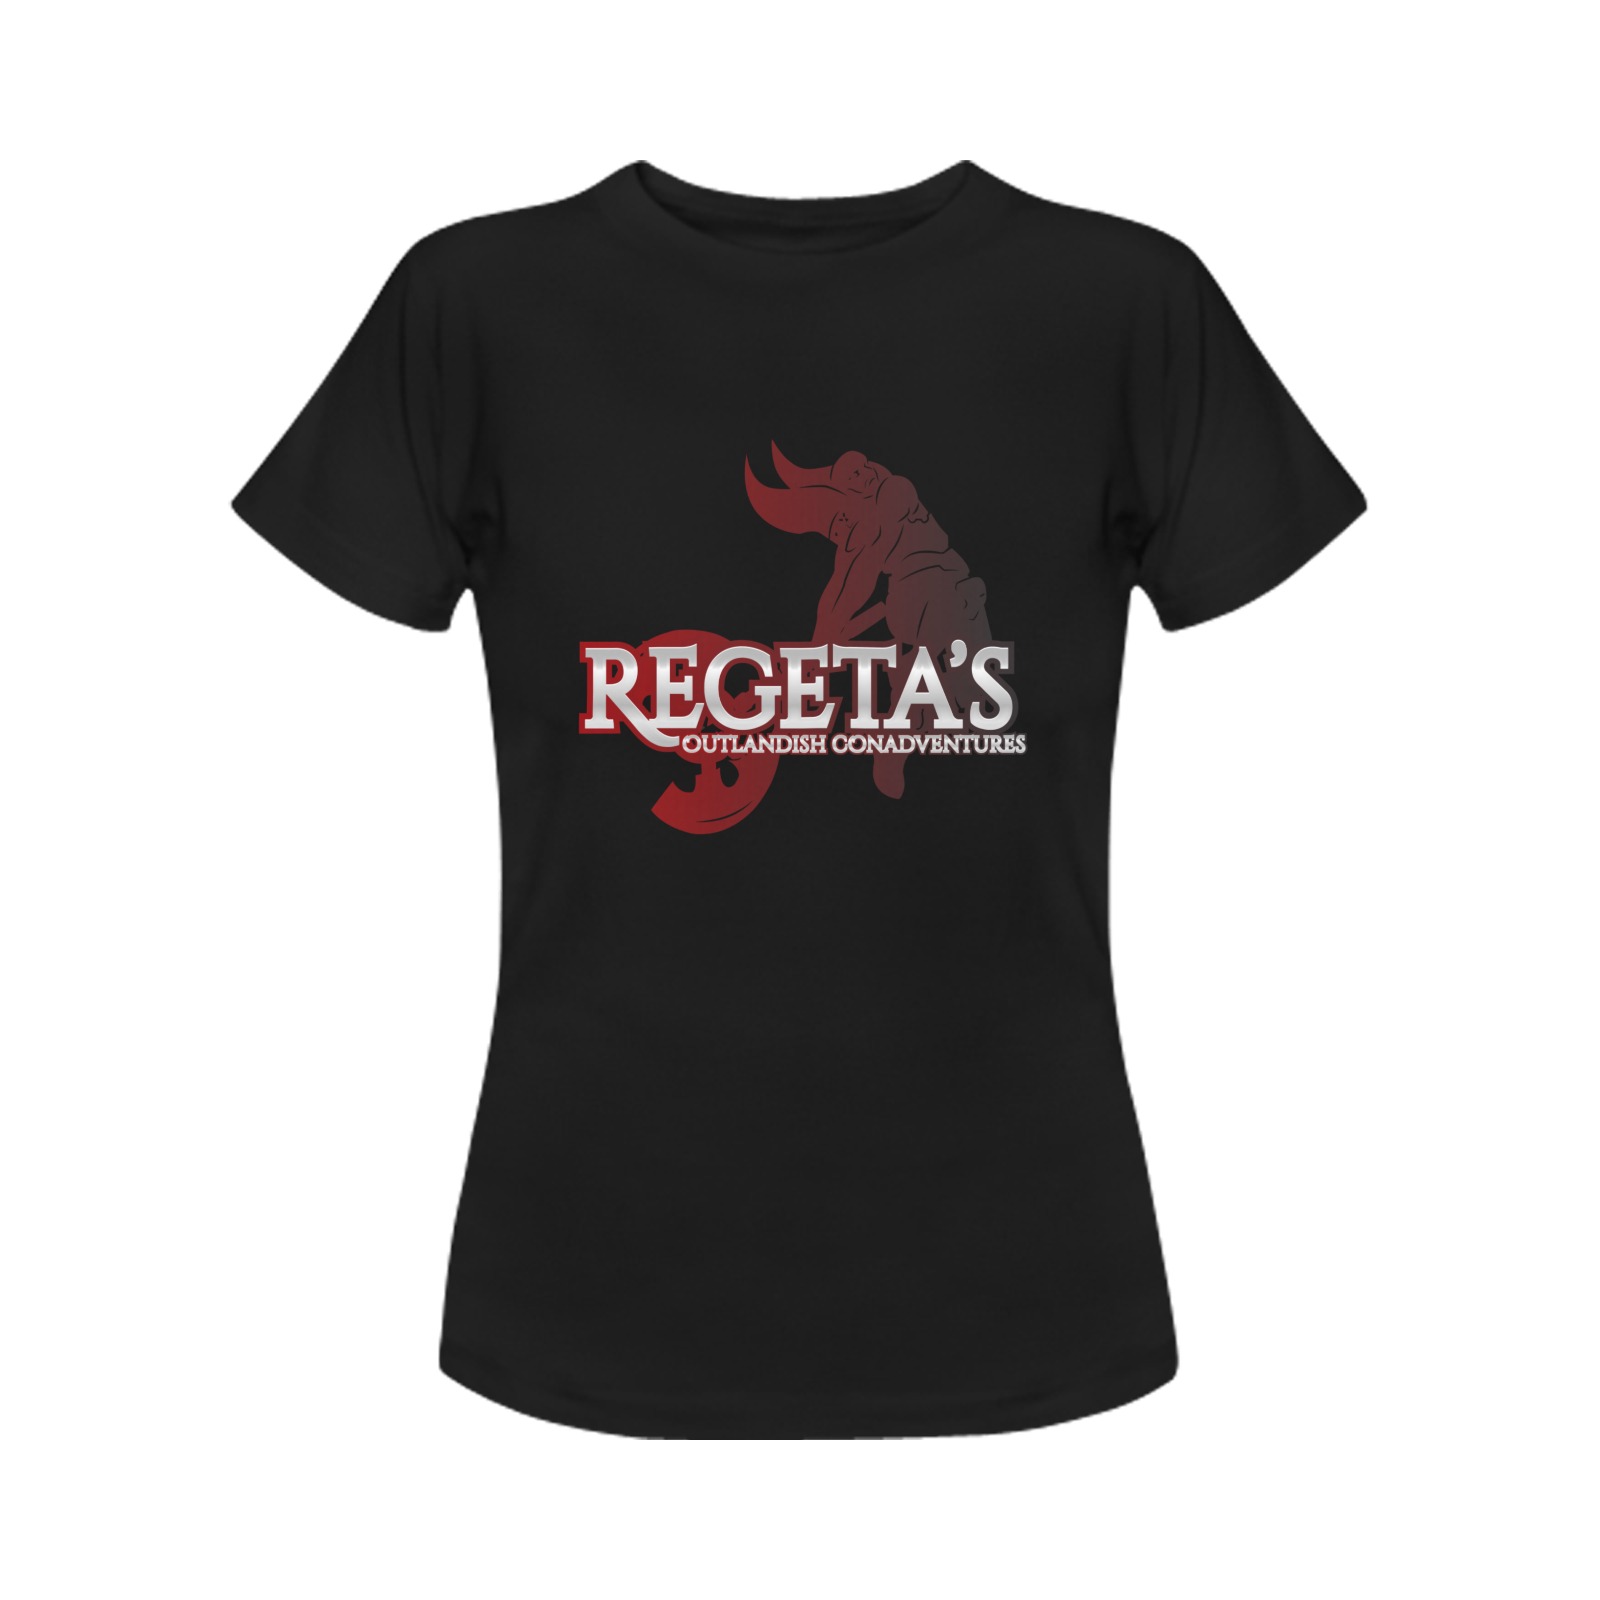 ROCAFEMSHIRT Women's T-Shirt in USA Size (Front Printing Only)